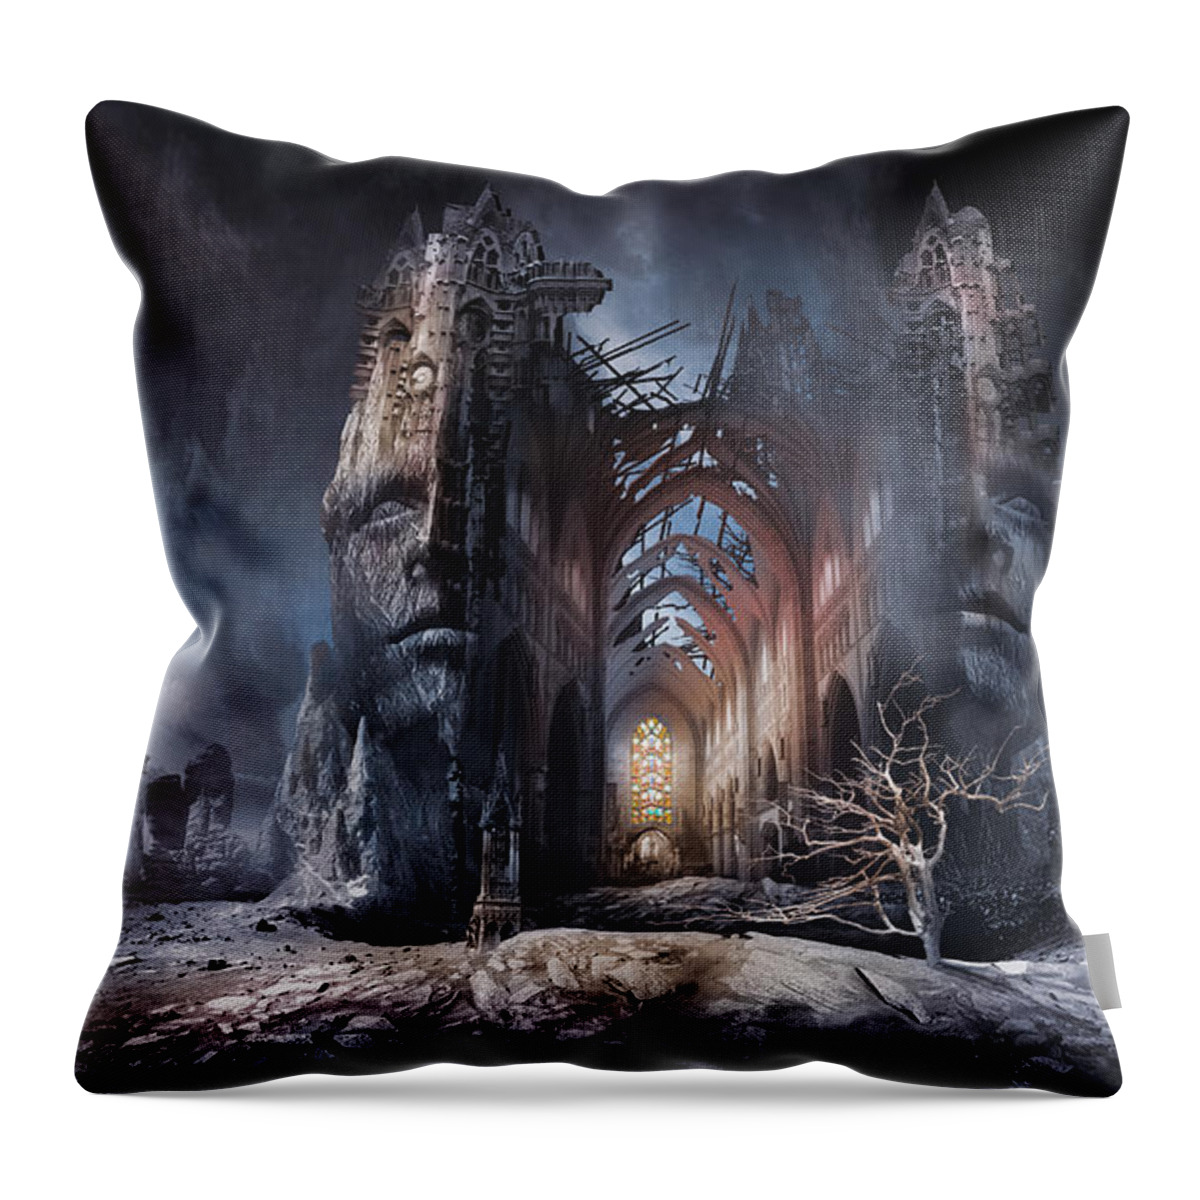 Portrait Architecture Throw Pillow featuring the digital art In Search of Meaning by George Grie